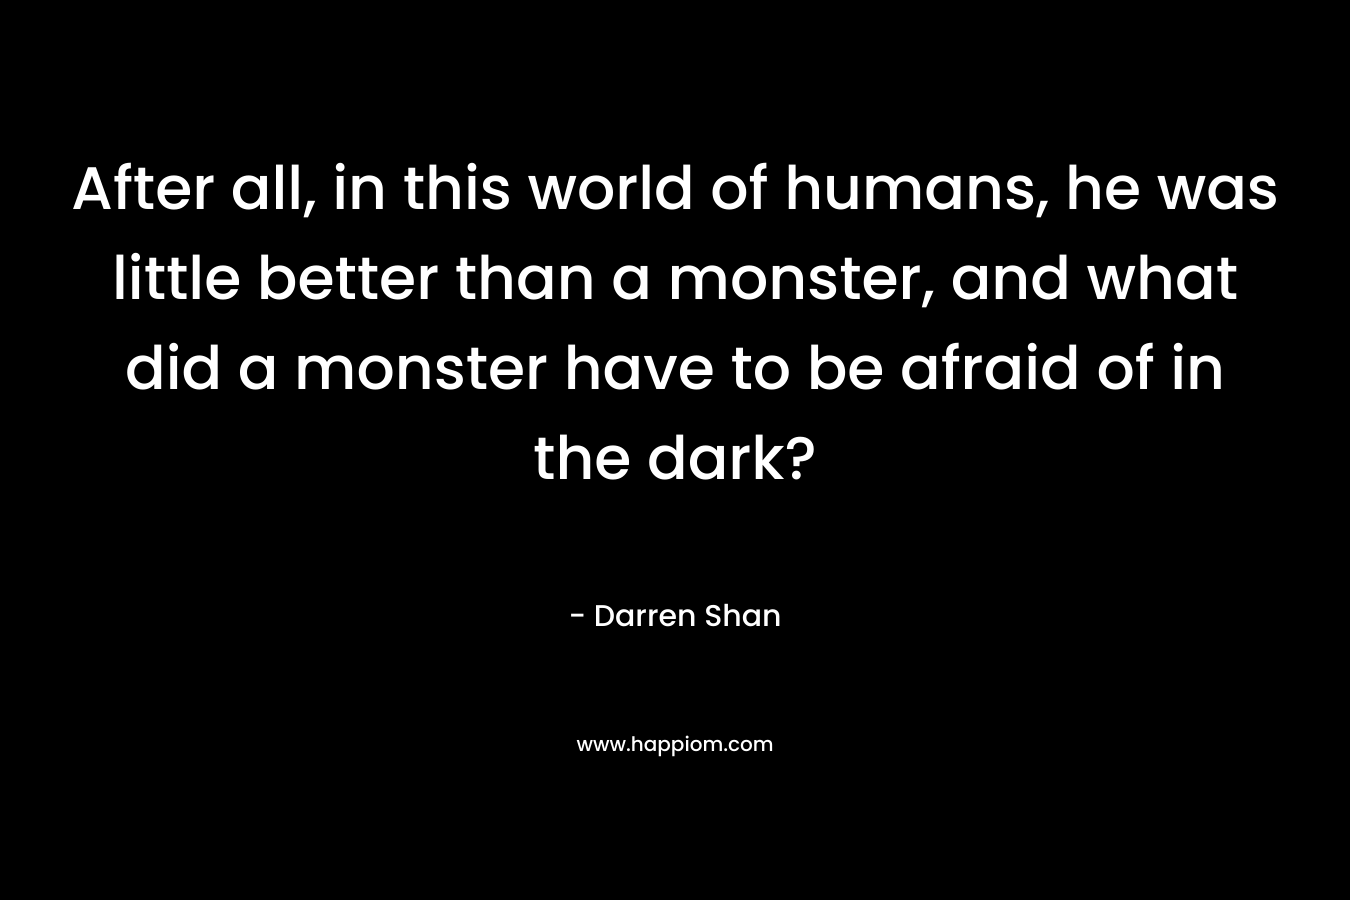 After all, in this world of humans, he was little better than a monster, and what did a monster have to be afraid of in the dark? – Darren Shan